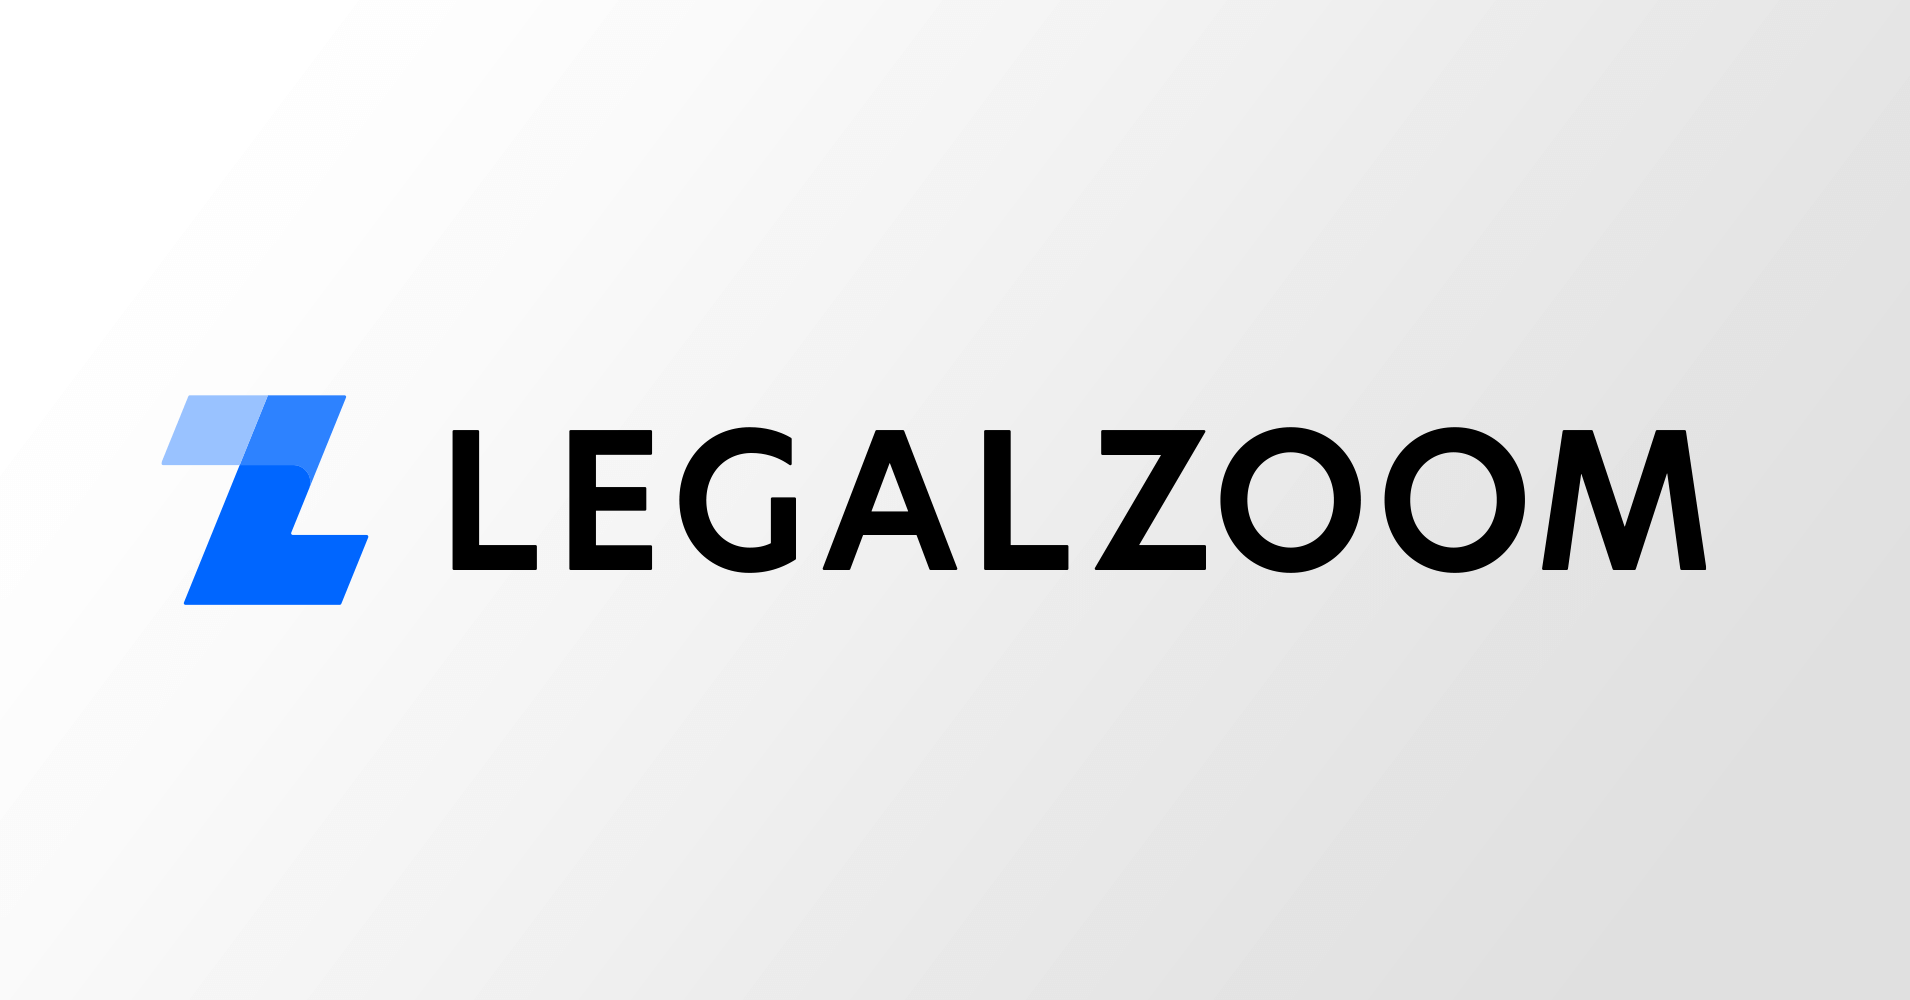 5 Ways to Use Legal Zoom